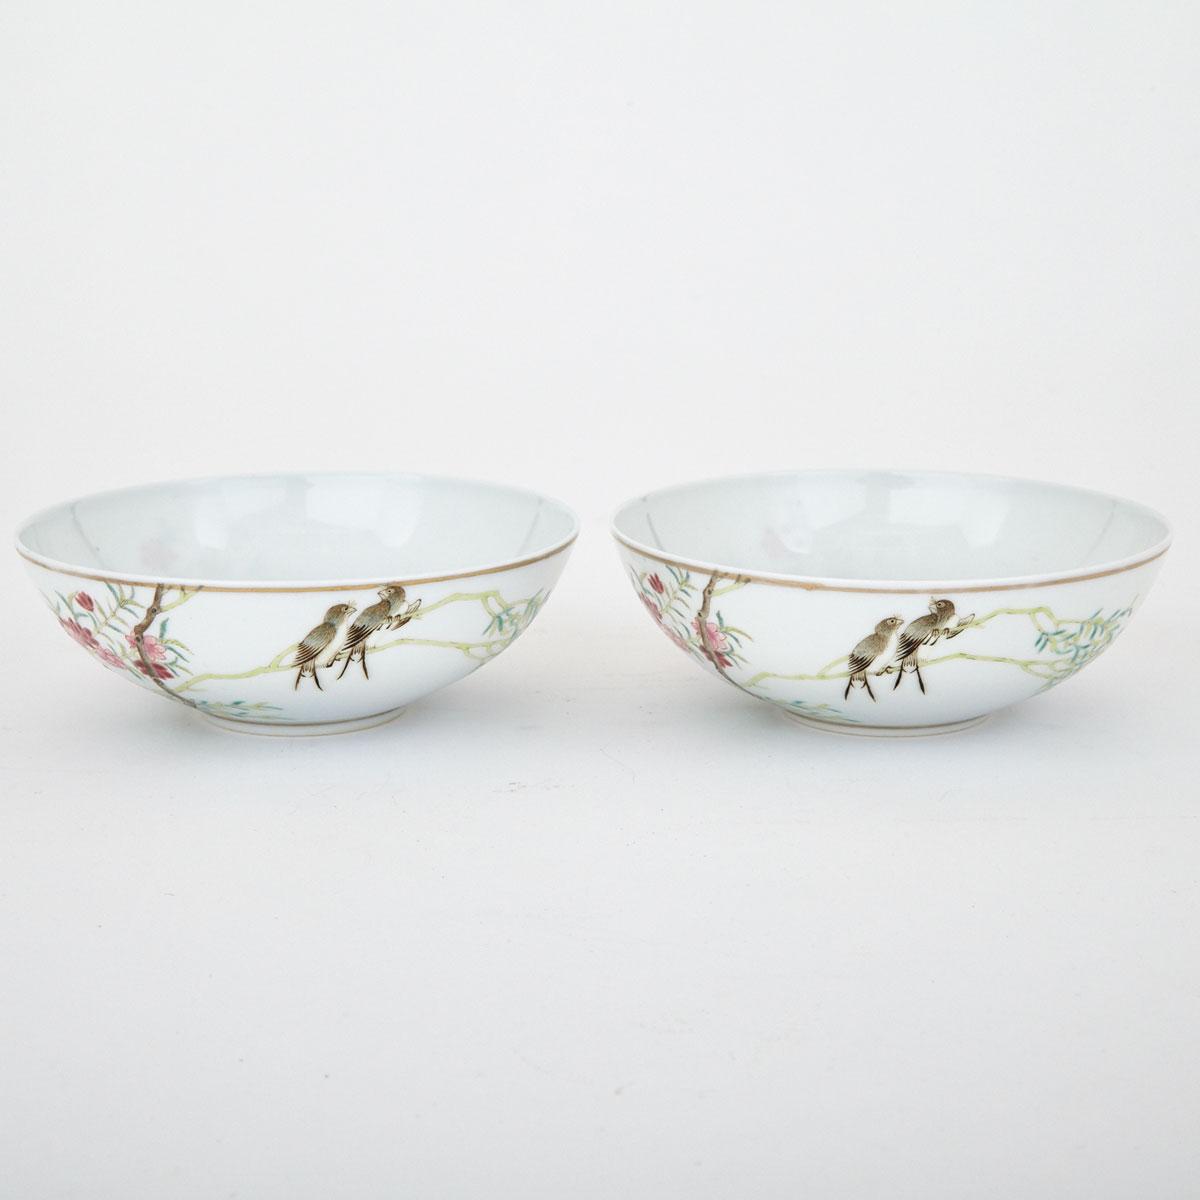 Pair of Famille Rose Shallow Bowls, Qinghua Mark, Republican Period